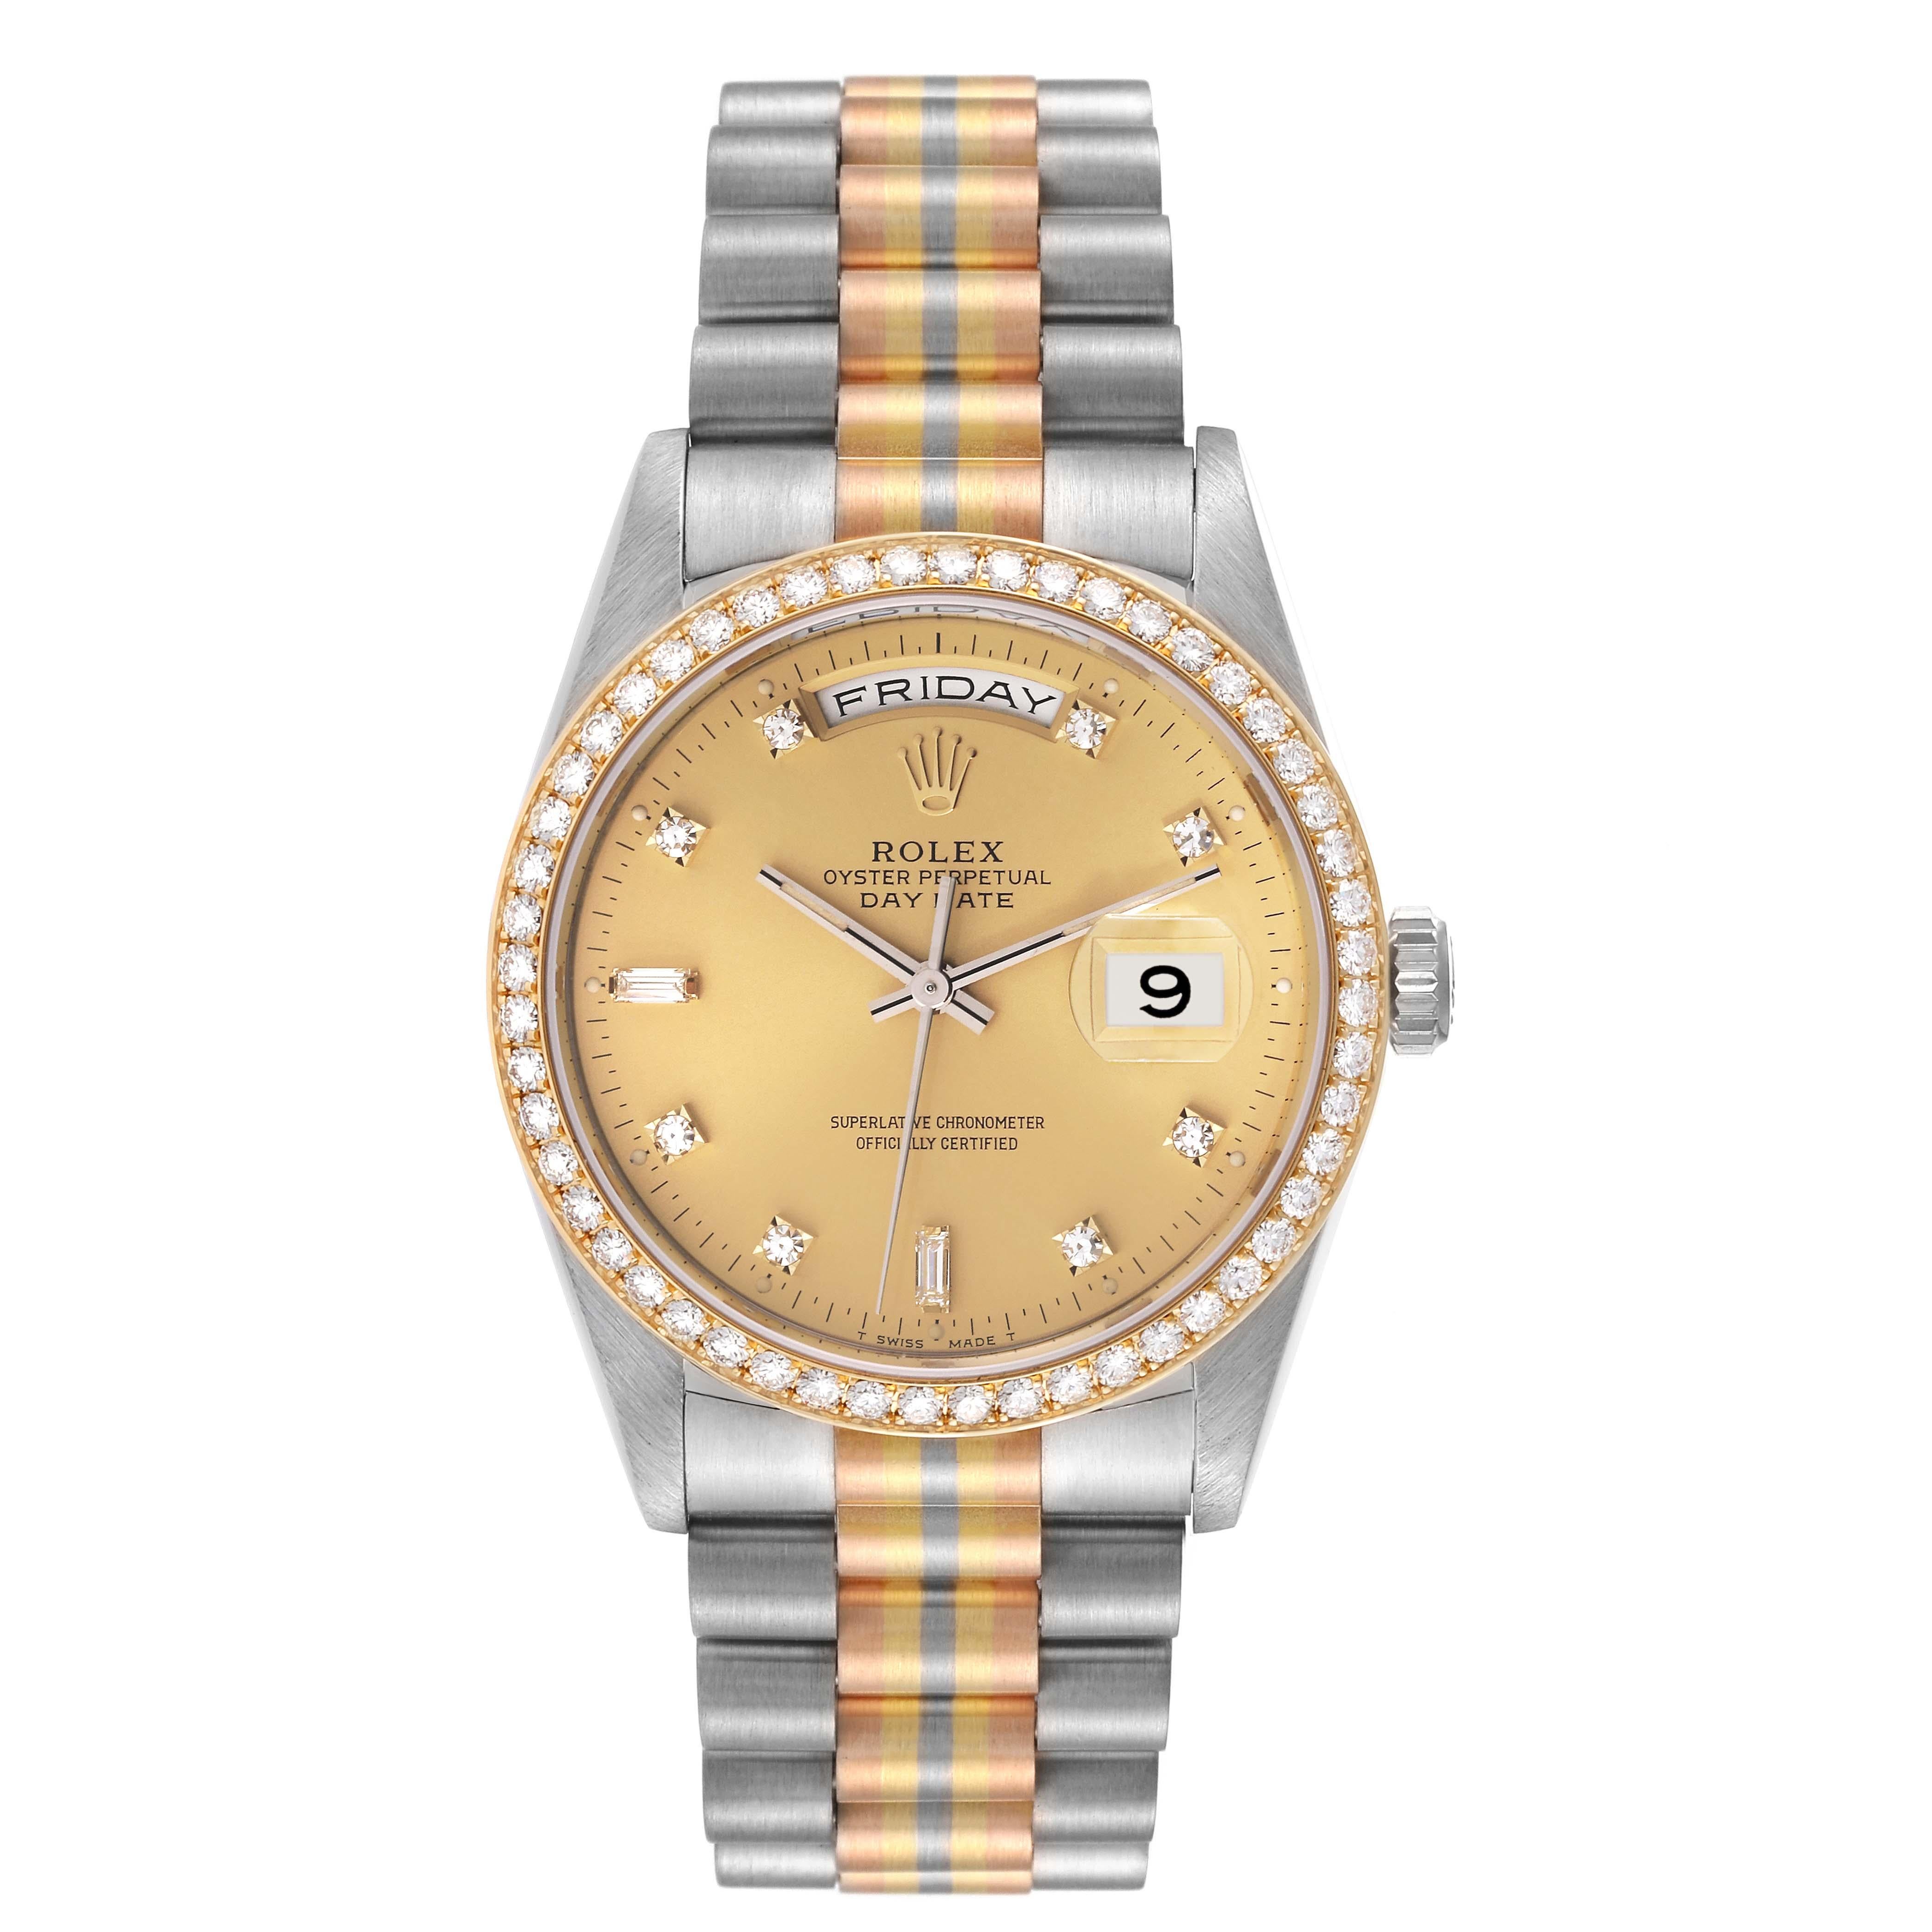 Rolex President Day-Date Tridor White Yellow Rose Gold Diamond Mens Watch 18349. Officially certified chronometer automatic self-winding movement with quickset date function. 18k white gold oyster case 36.0 mm in diameter. Rolex logo on a crown. 18k